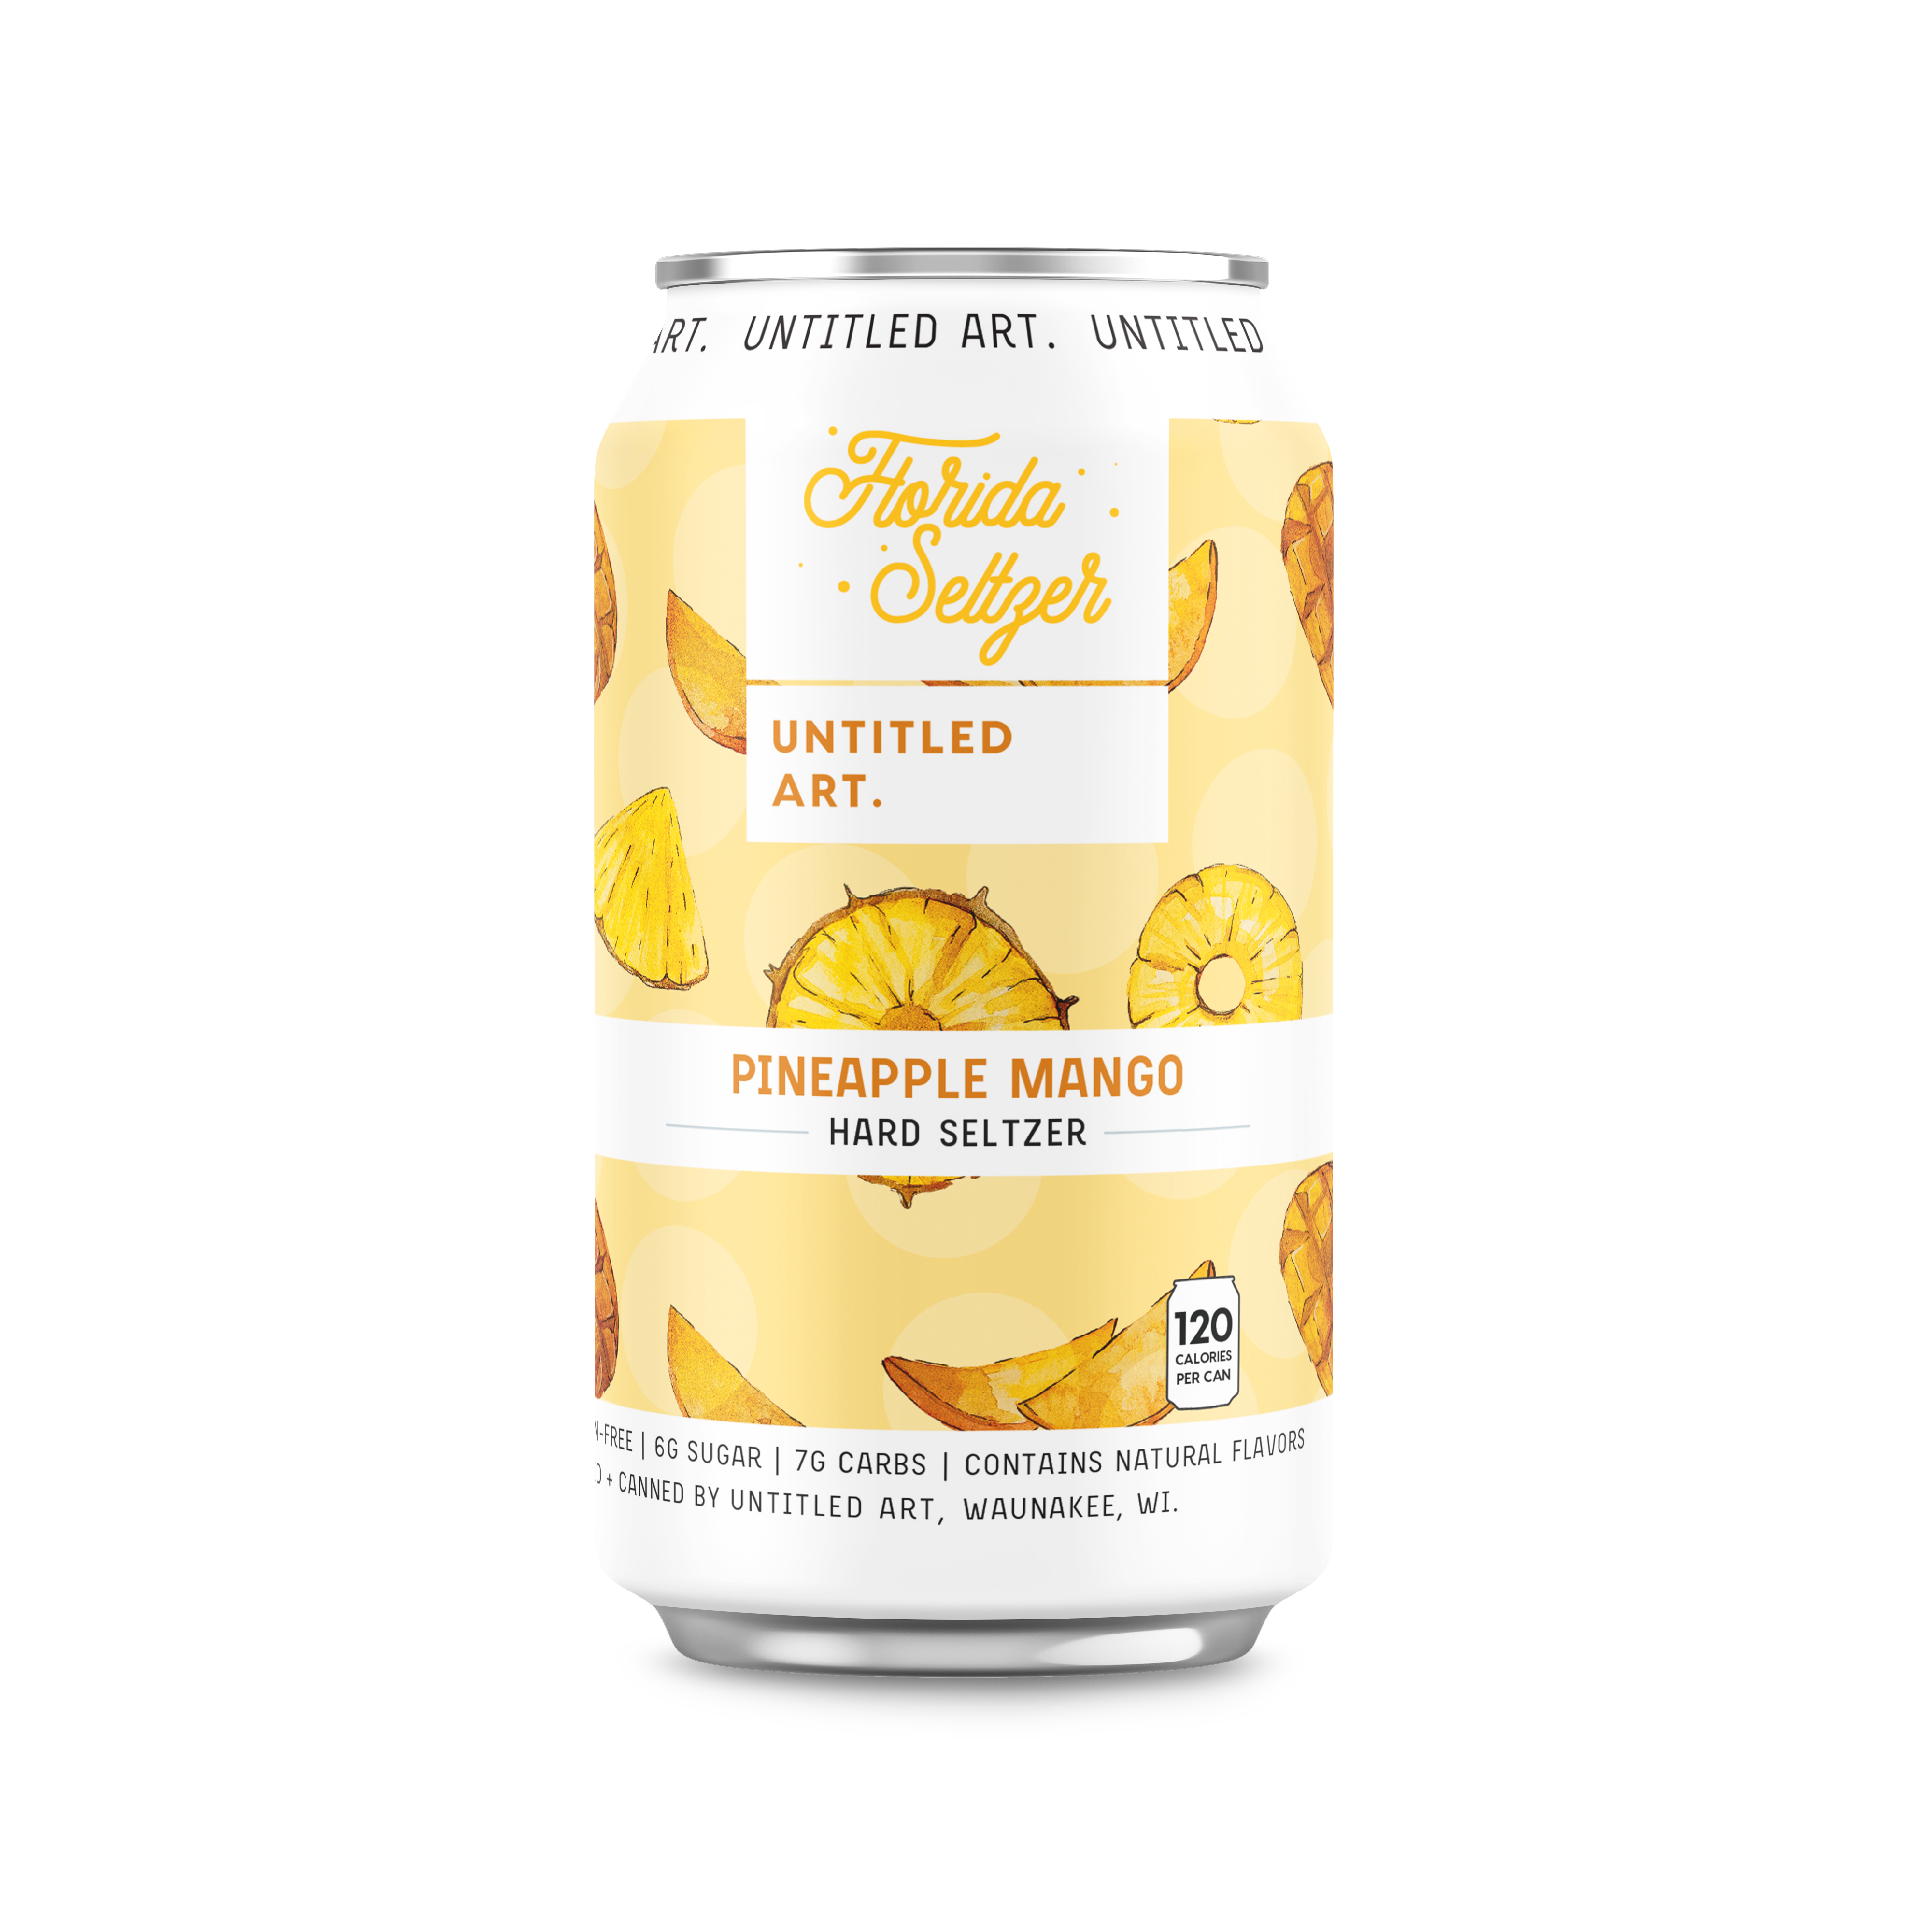 A can of pineapple and mango iced tea.